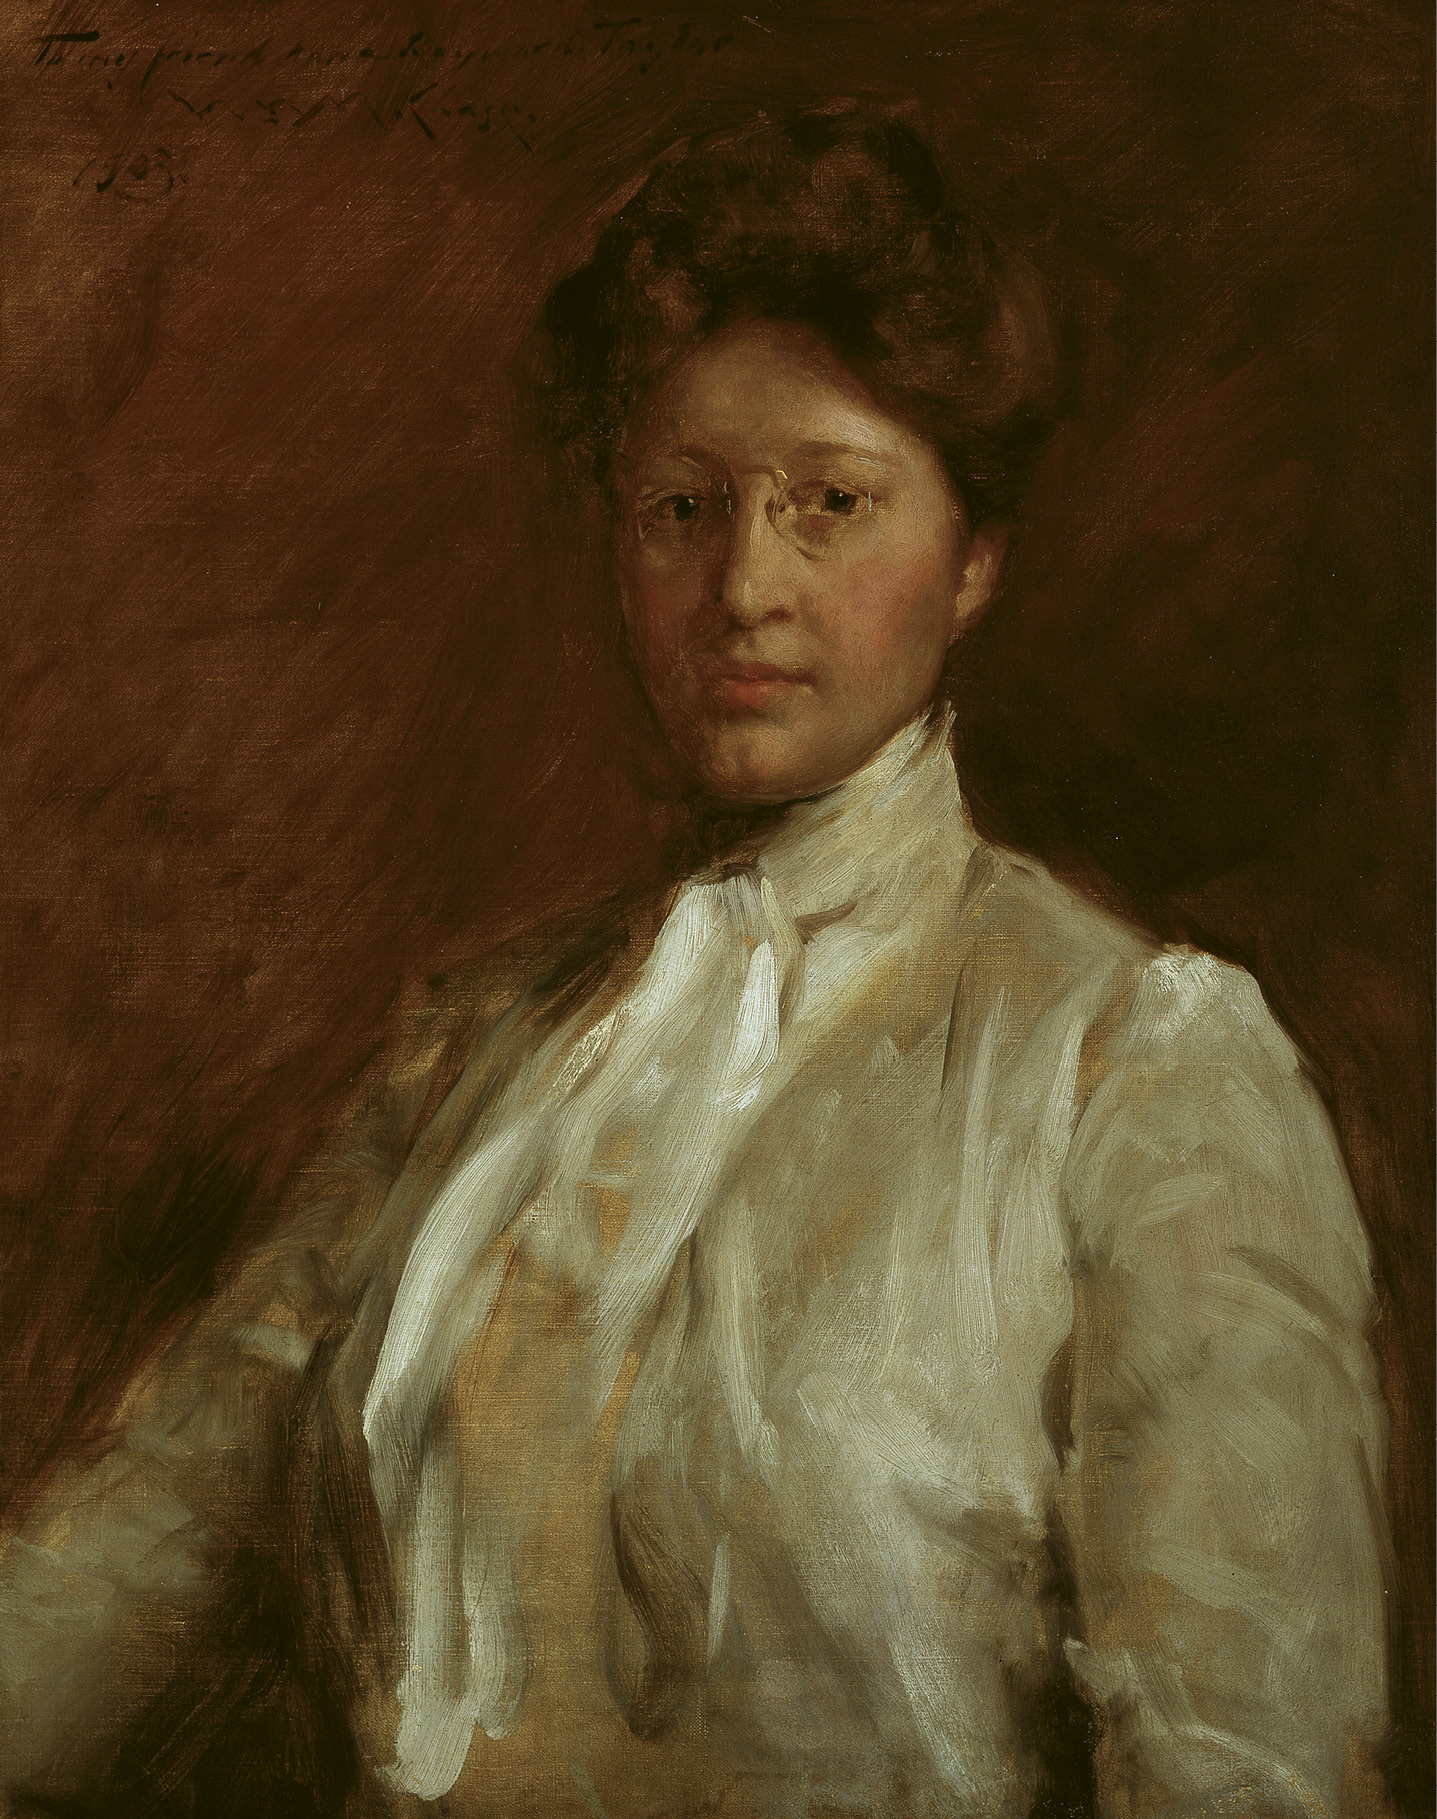 Taylor studied with renowned portrait artist and American Impressionist William Merritt Chase in Holland during the summer of 1903. Chase later visited her family in Columbia and painted three portraits of them, including this one of Anna.